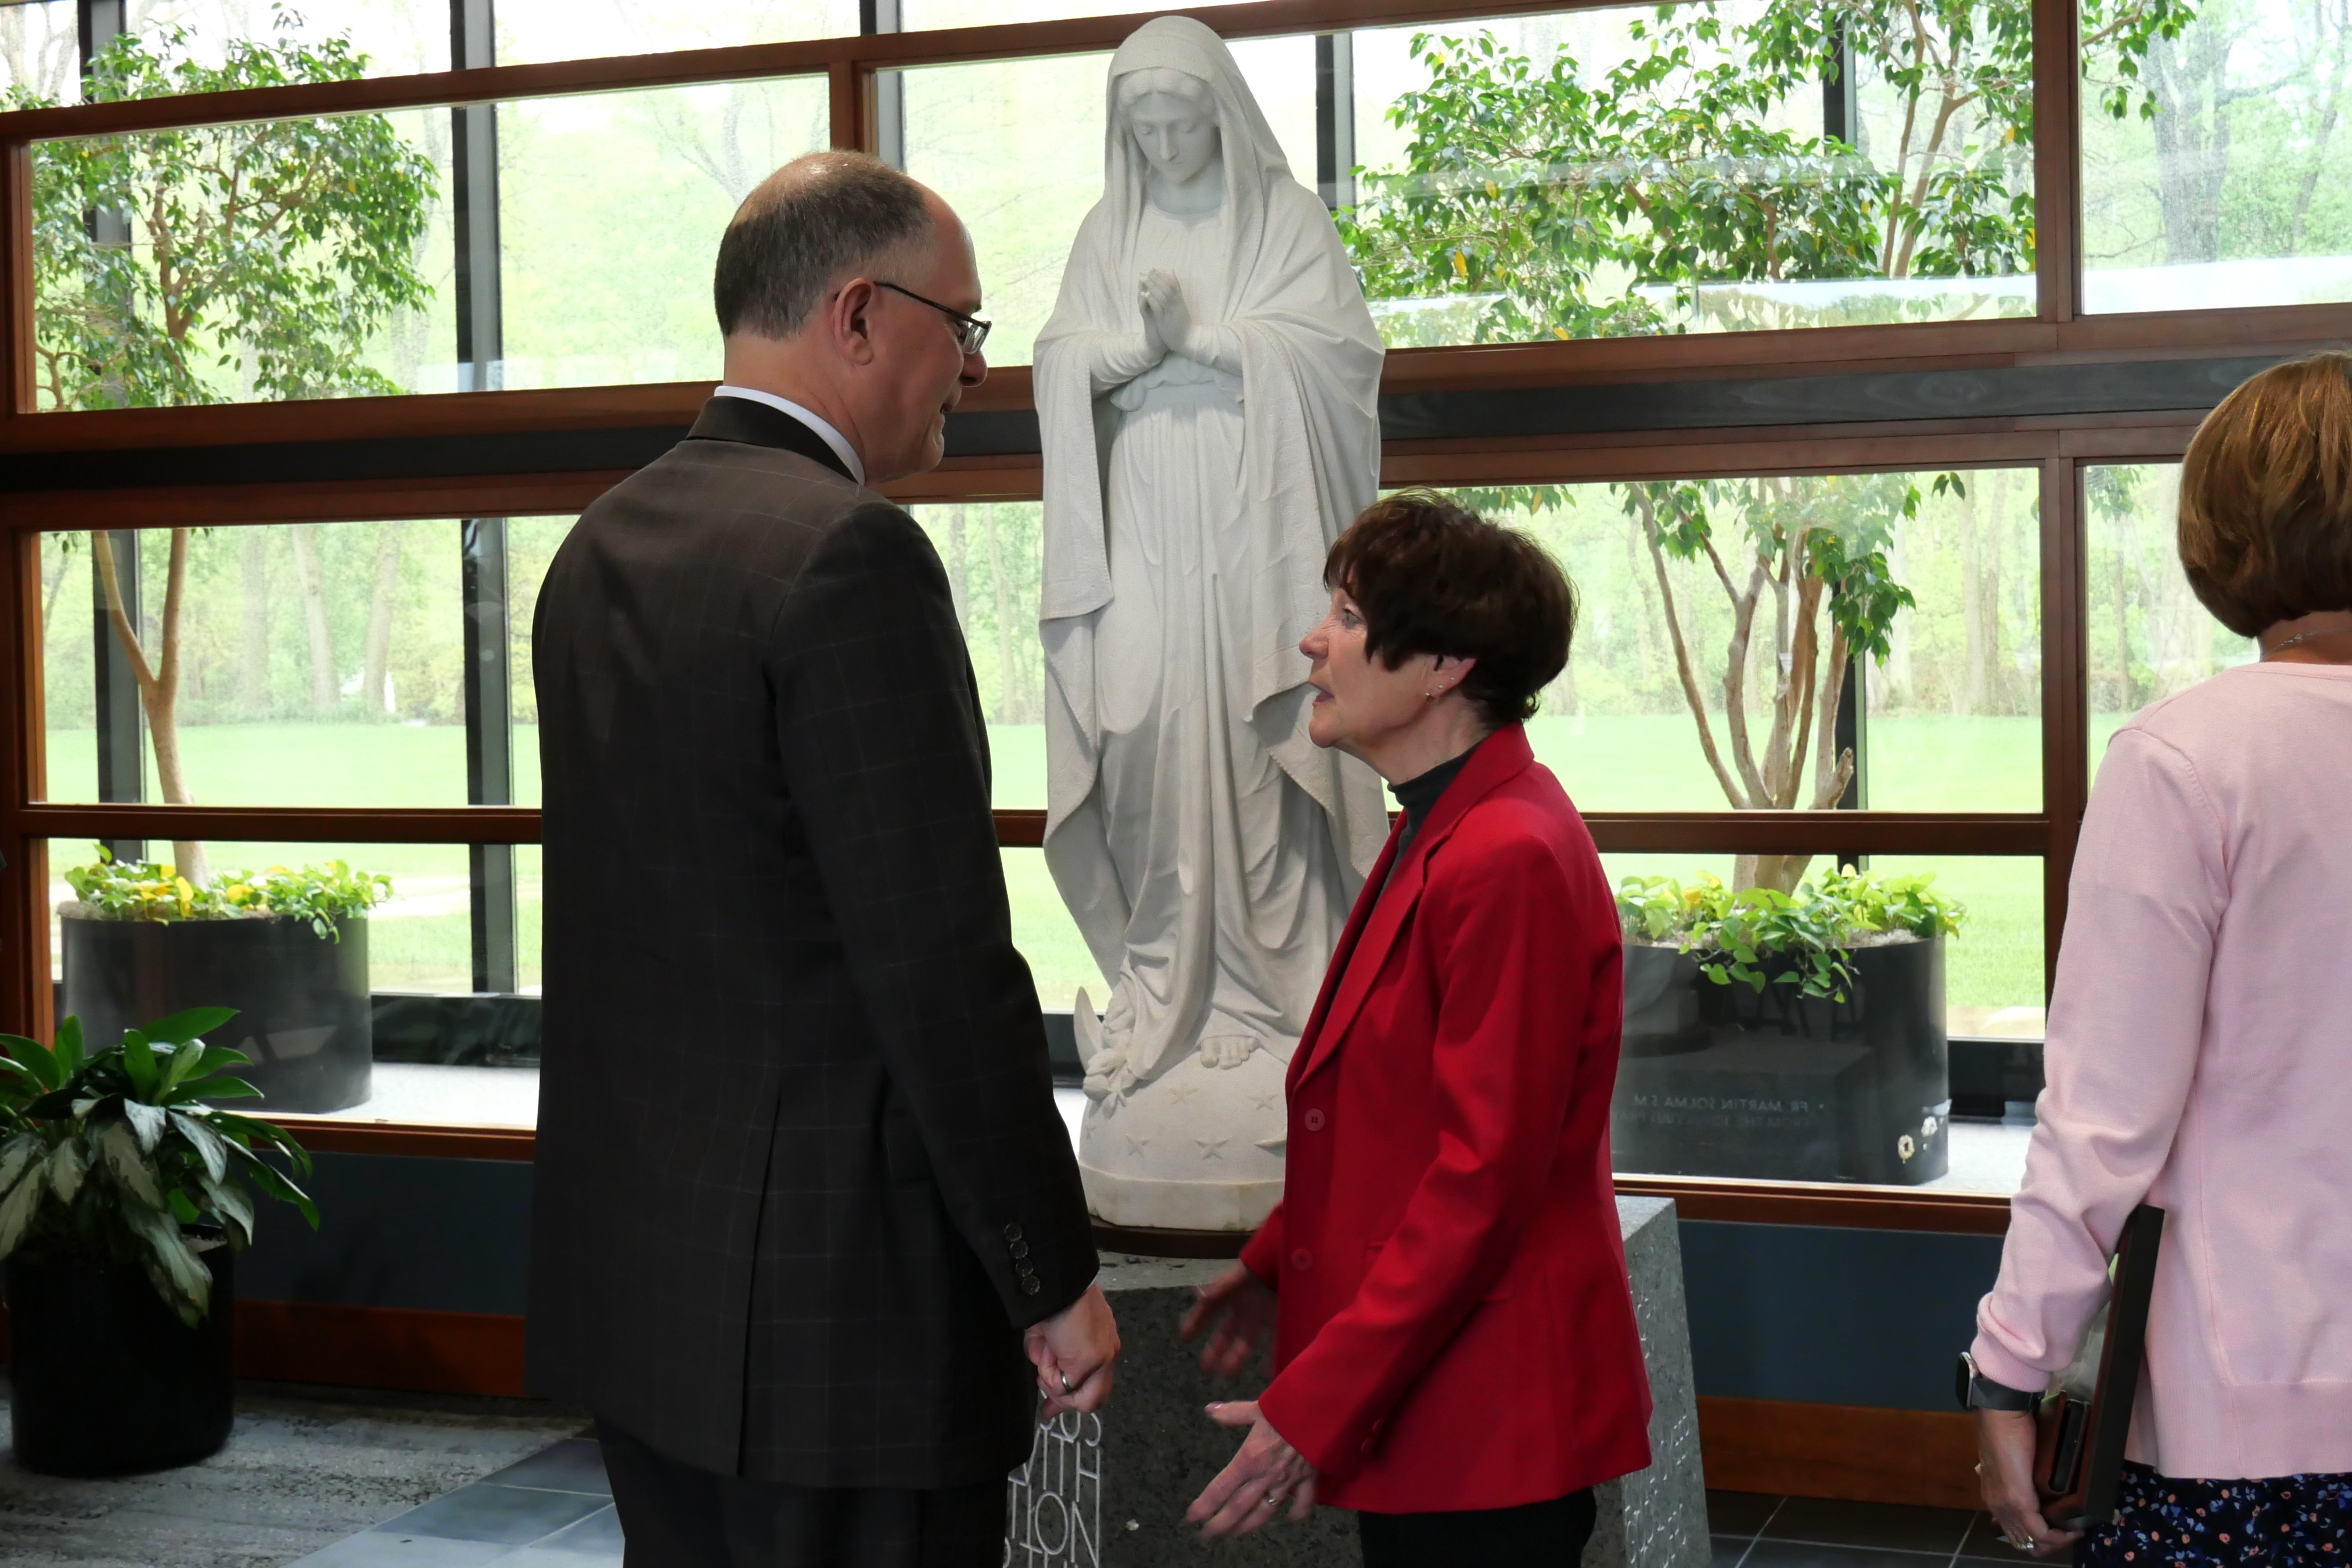 President Eric Spina and Patti Procuniar talk in front of statue